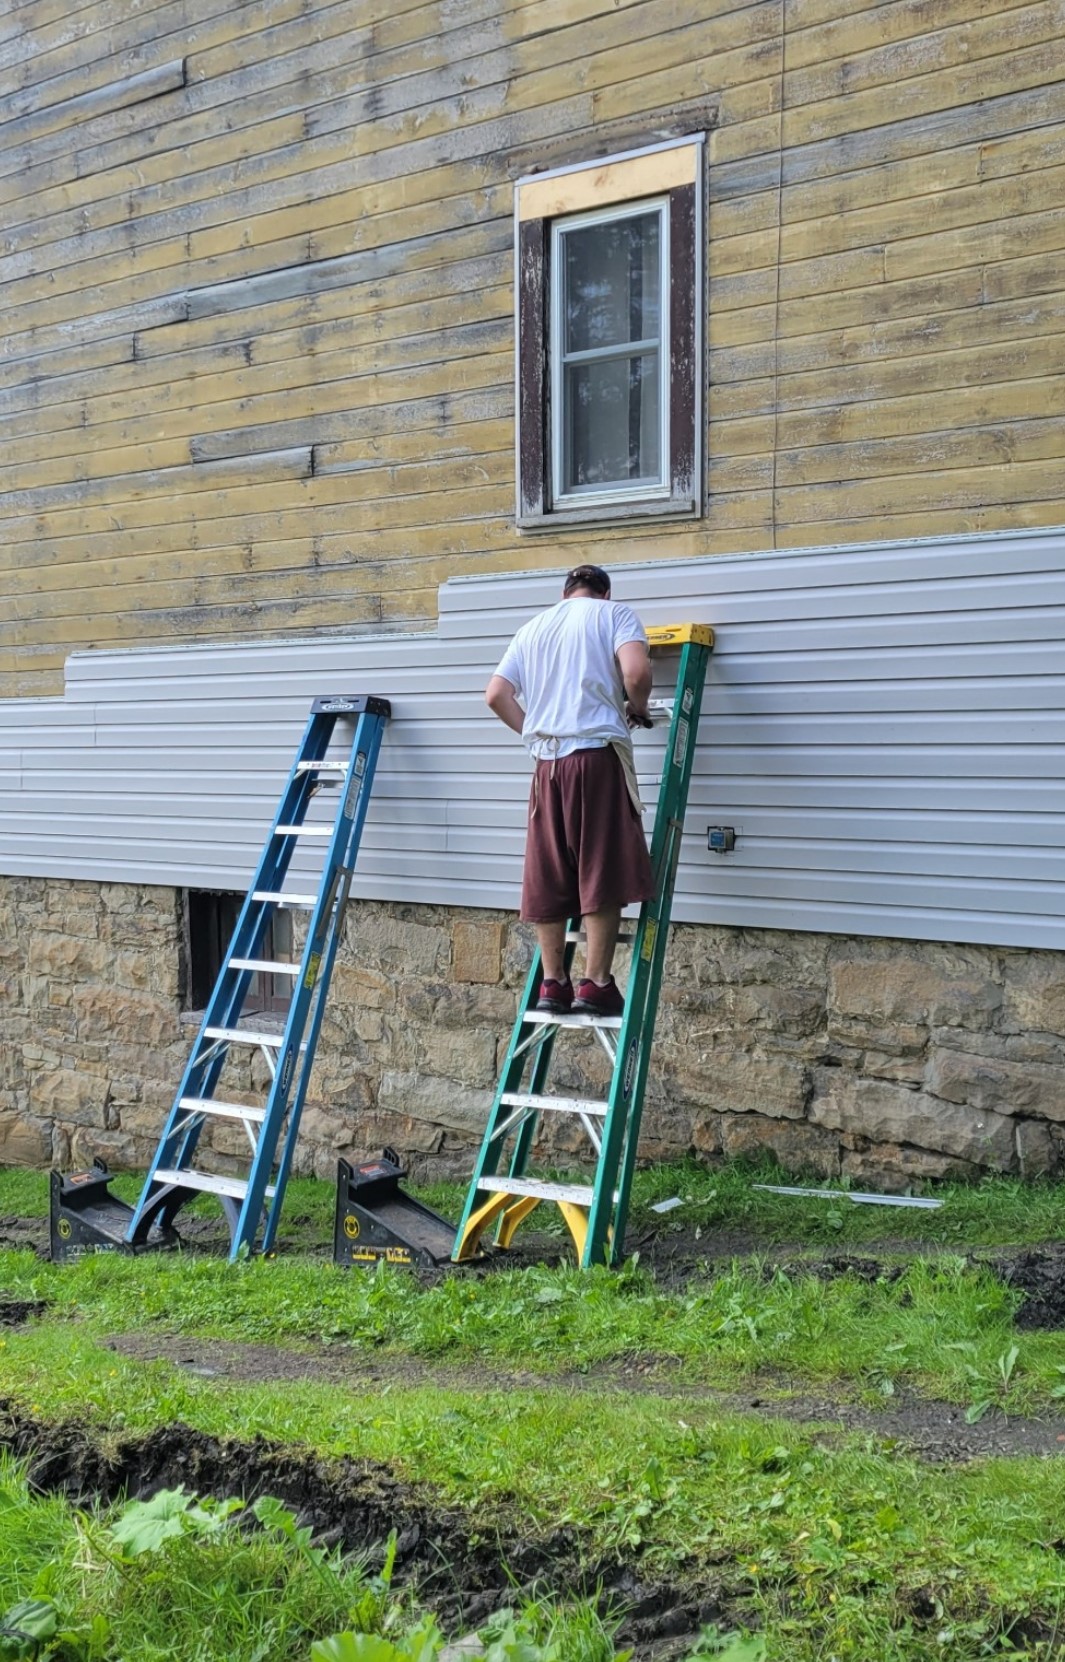 A person on a ladder puts siding on a house